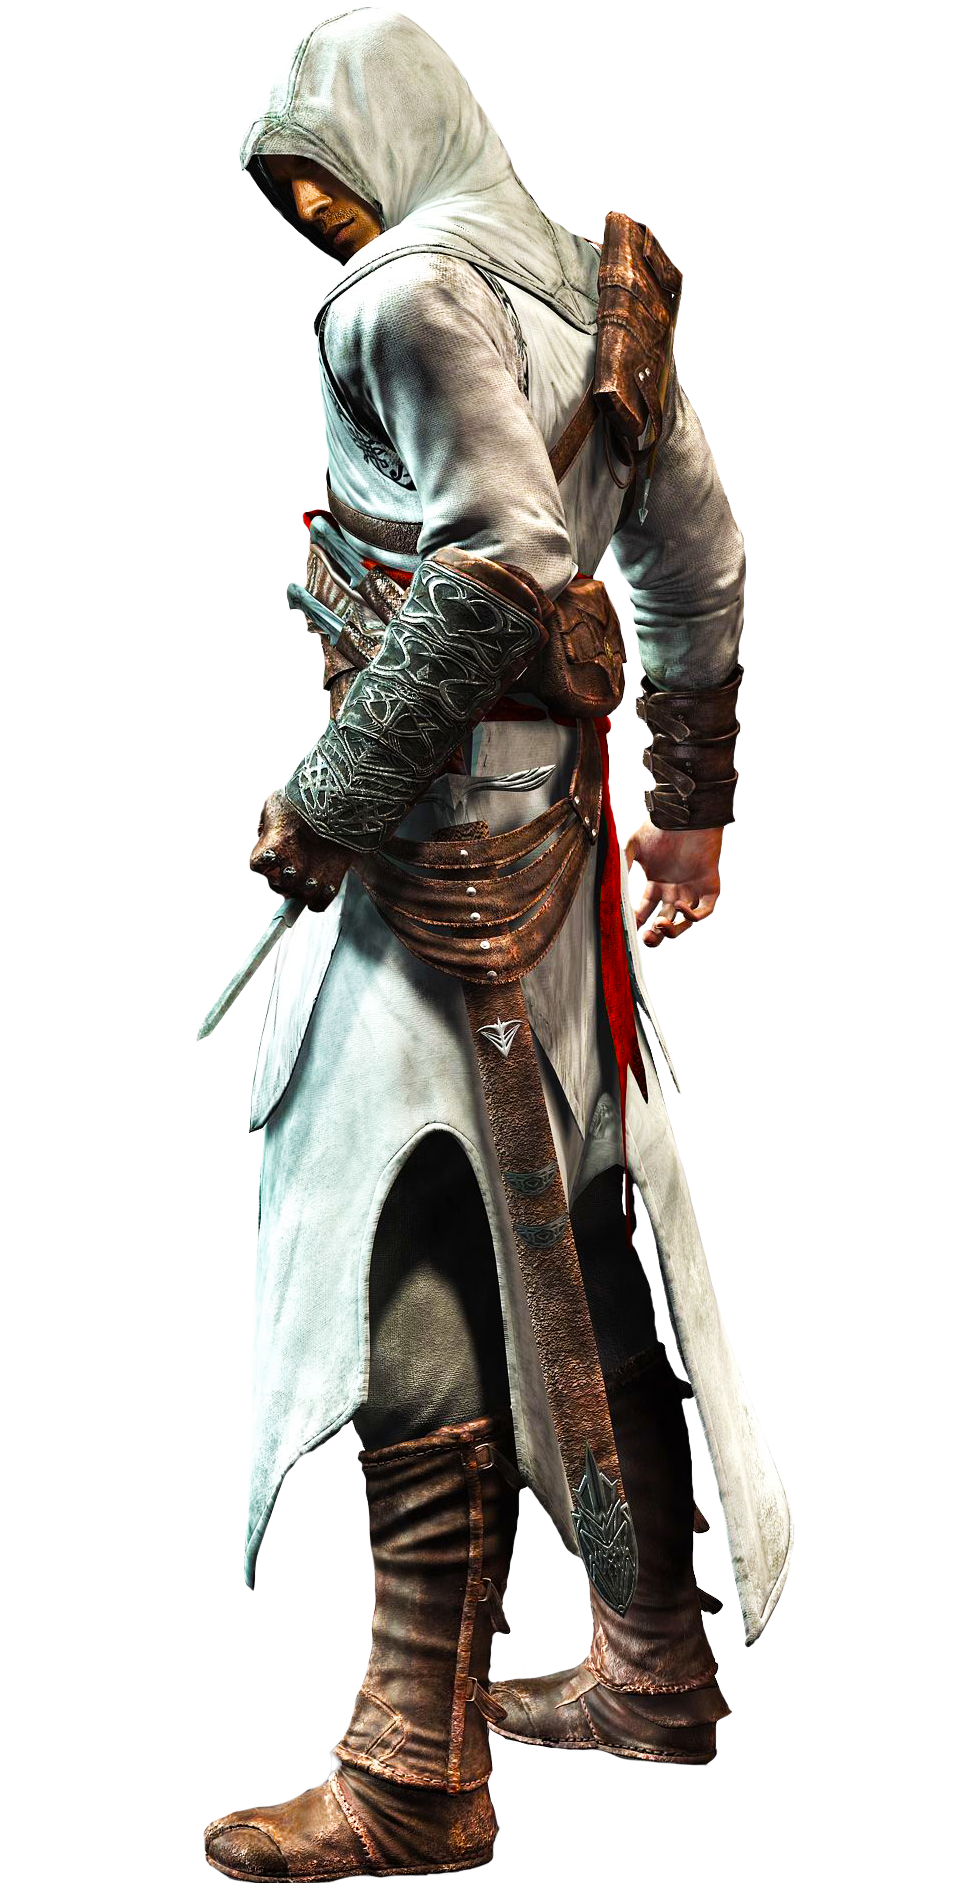 Download PNG image - Altair Assassins Creed PNG Transparent Image 